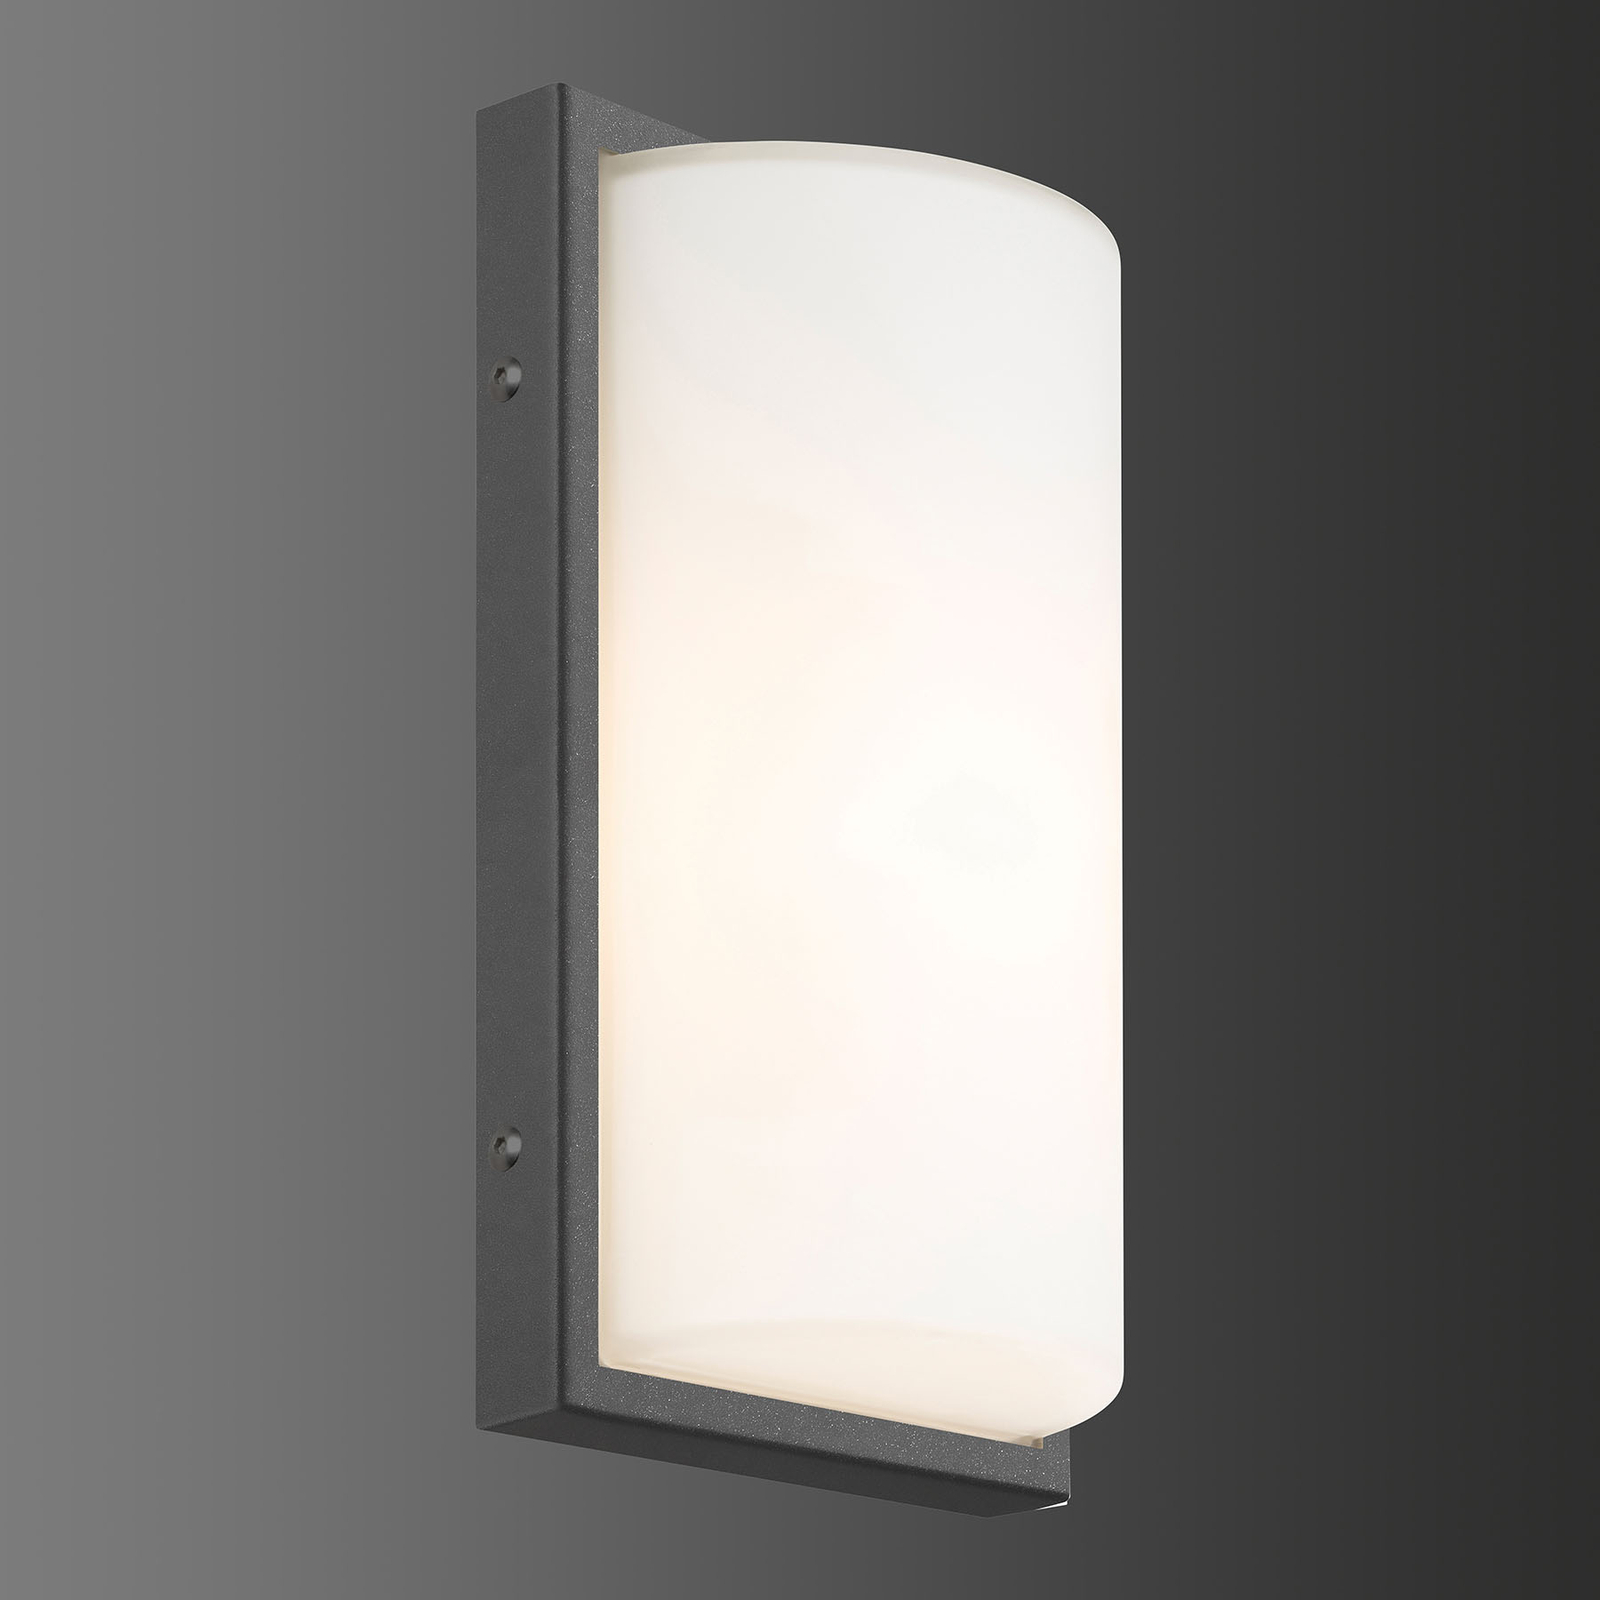 039 outdoor wall light, stainless steel, graphite